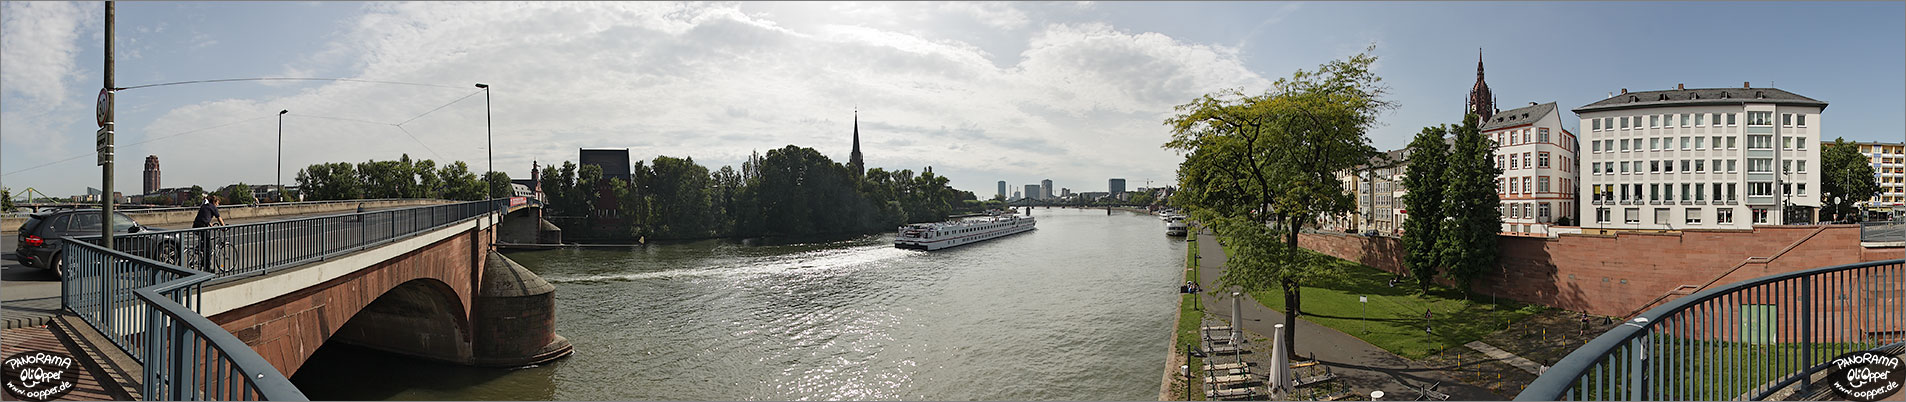 Panorama Frankfurt am Main - Alte Brcke - p1134 - (c) by Oliver Opper